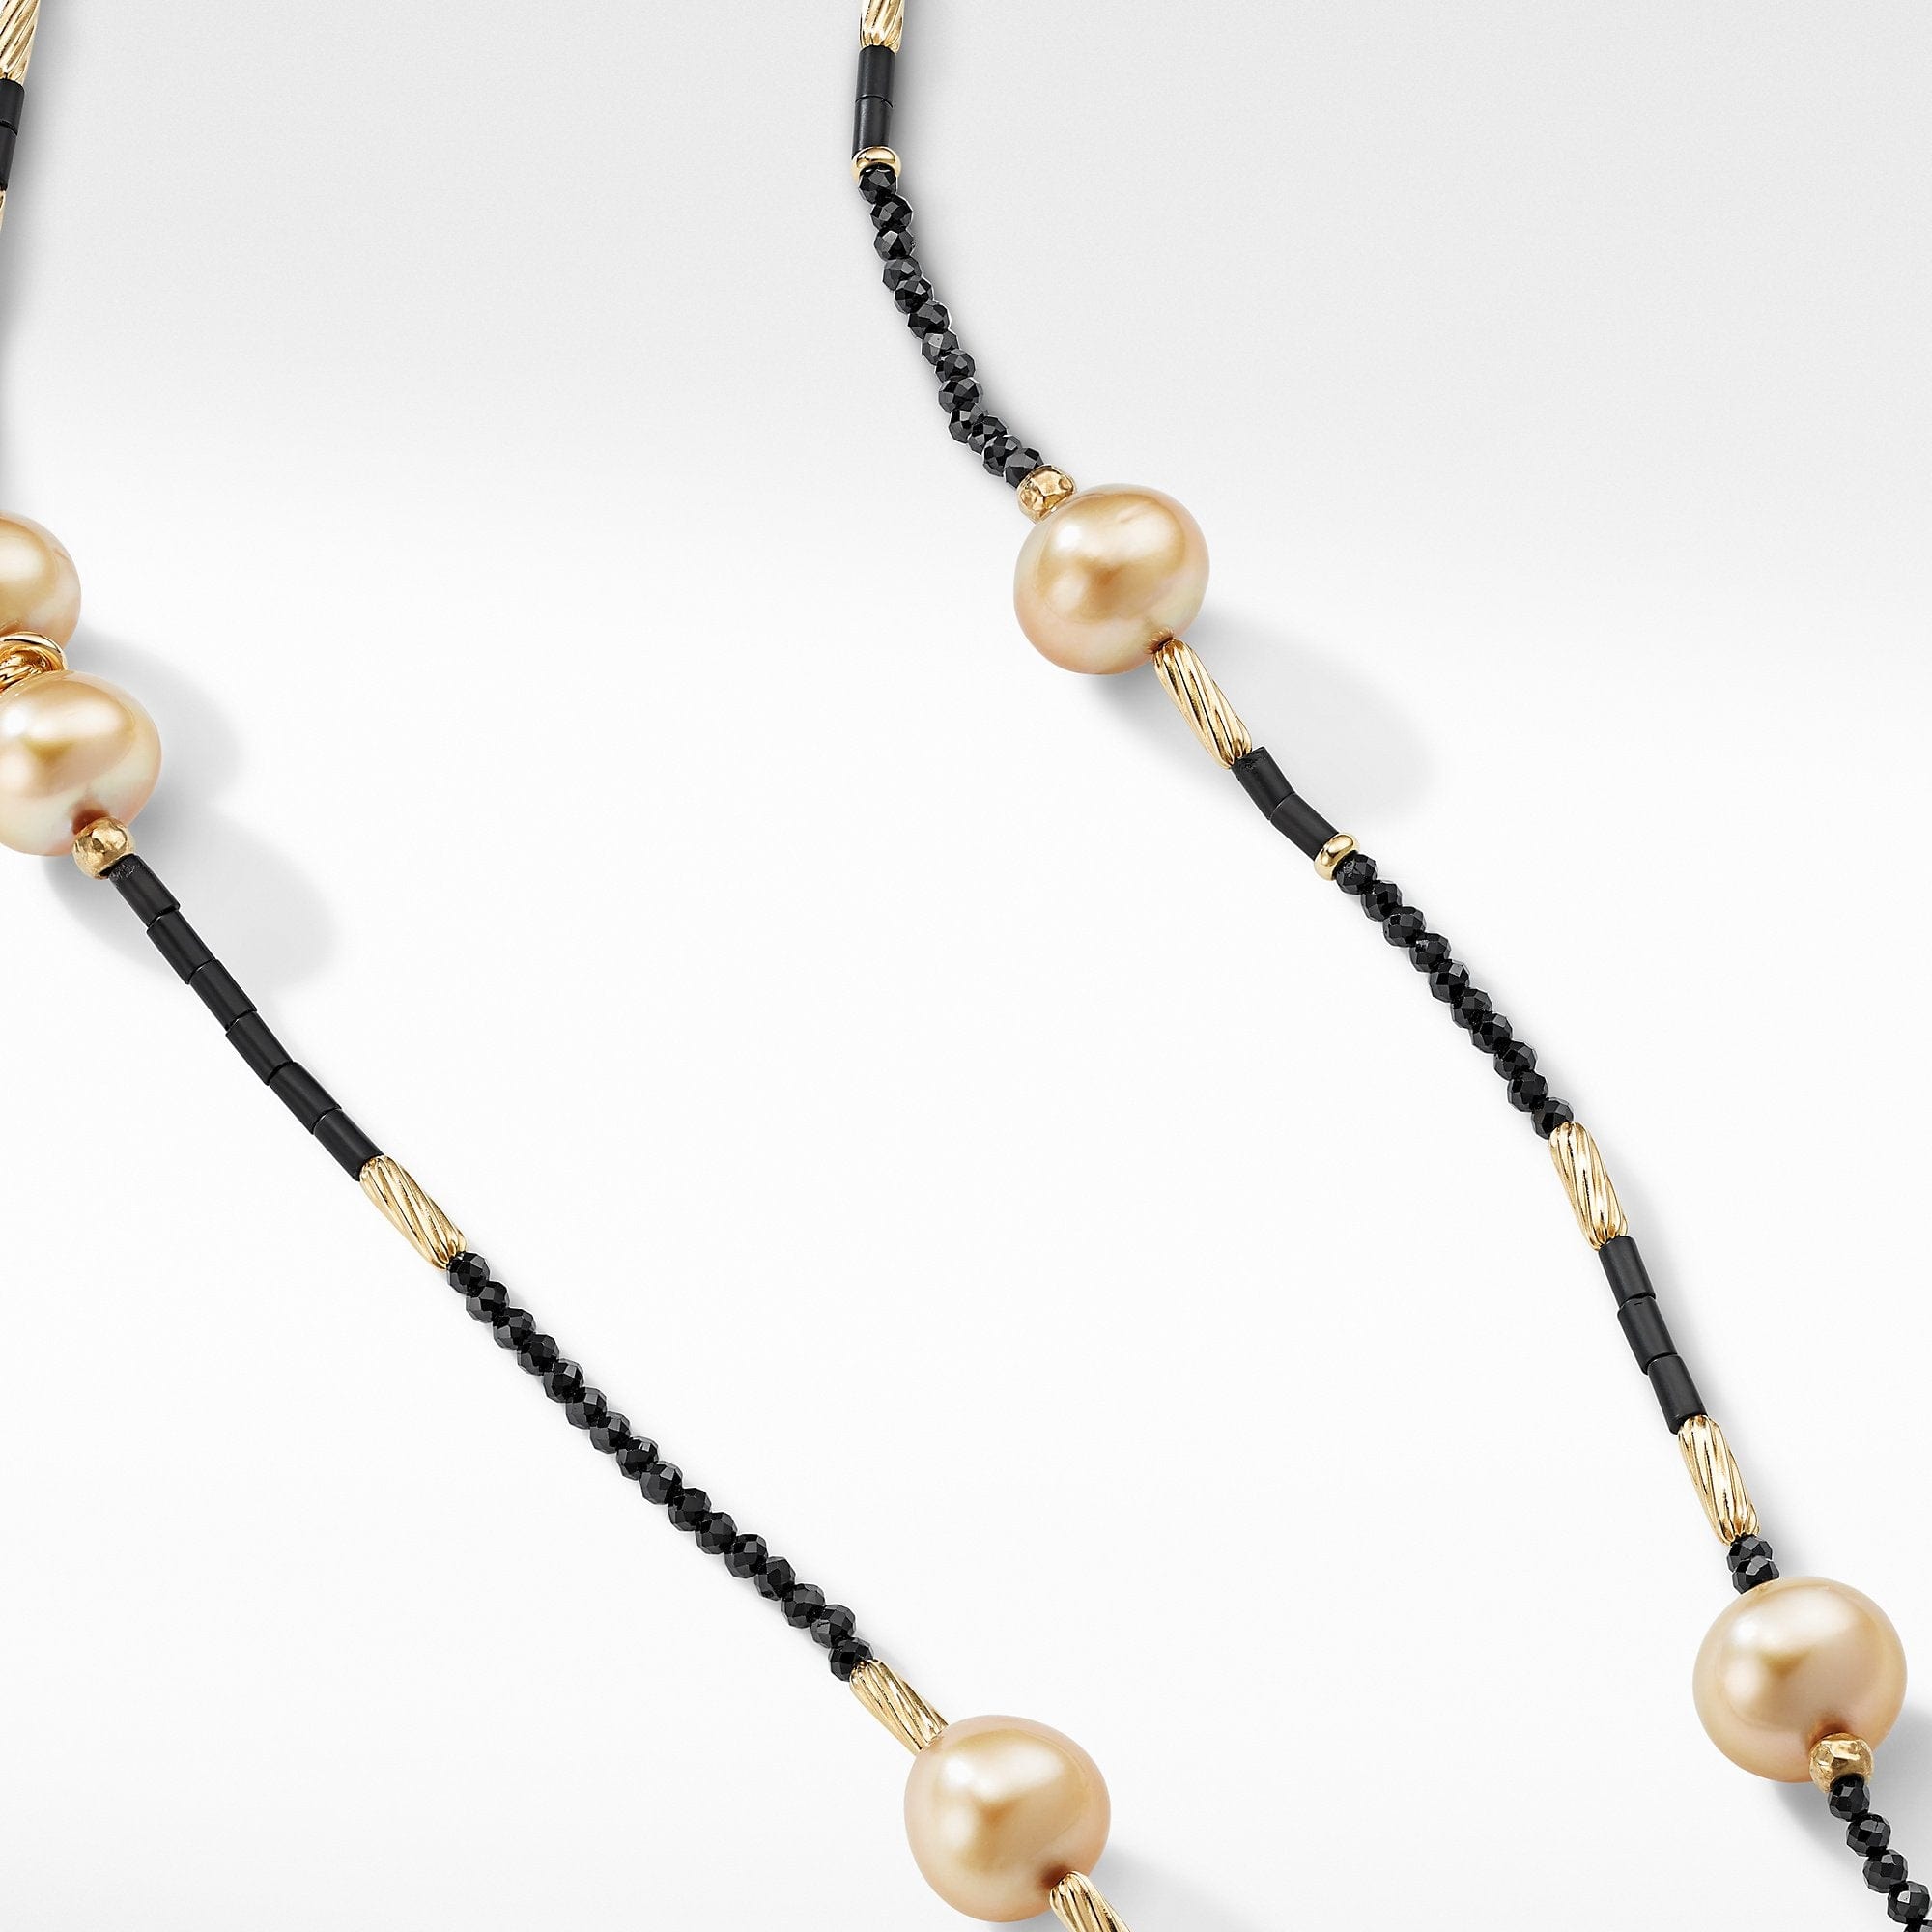 Tweejoux Black Spinel Black Onyx and Pearl Necklace